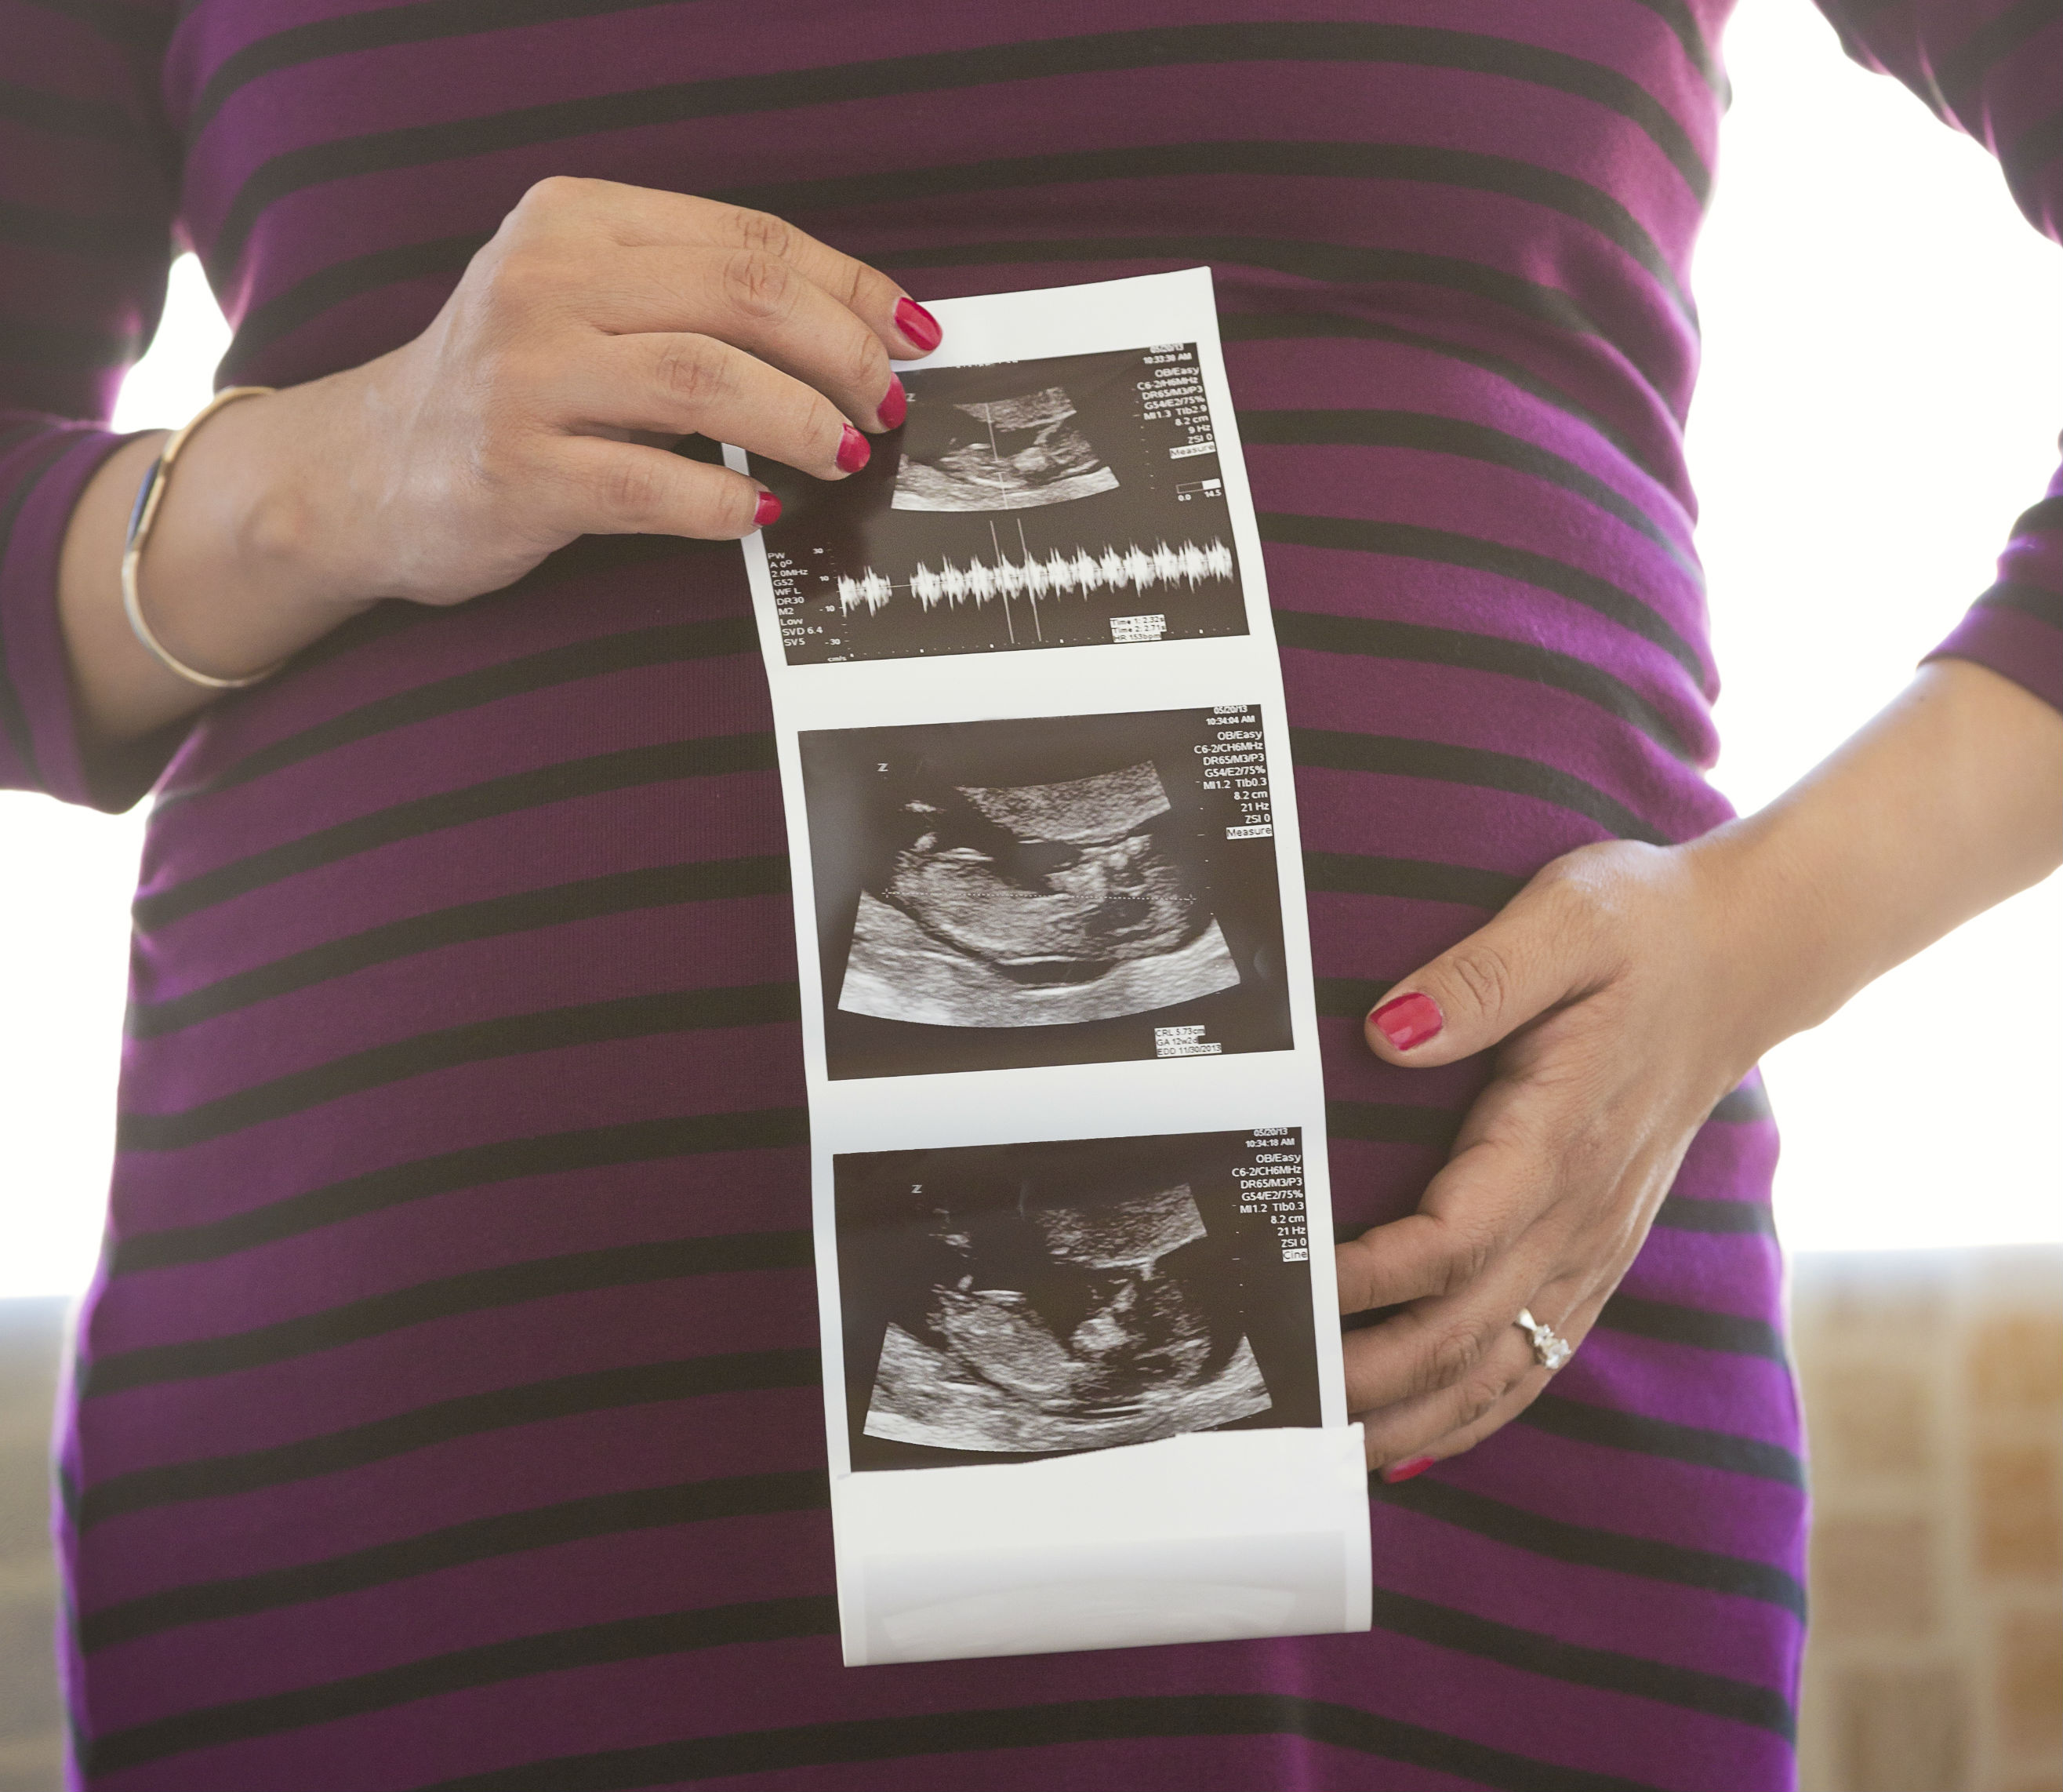 Use of CT scans during pregnancy increased in U.S. and Canada over 2 decades